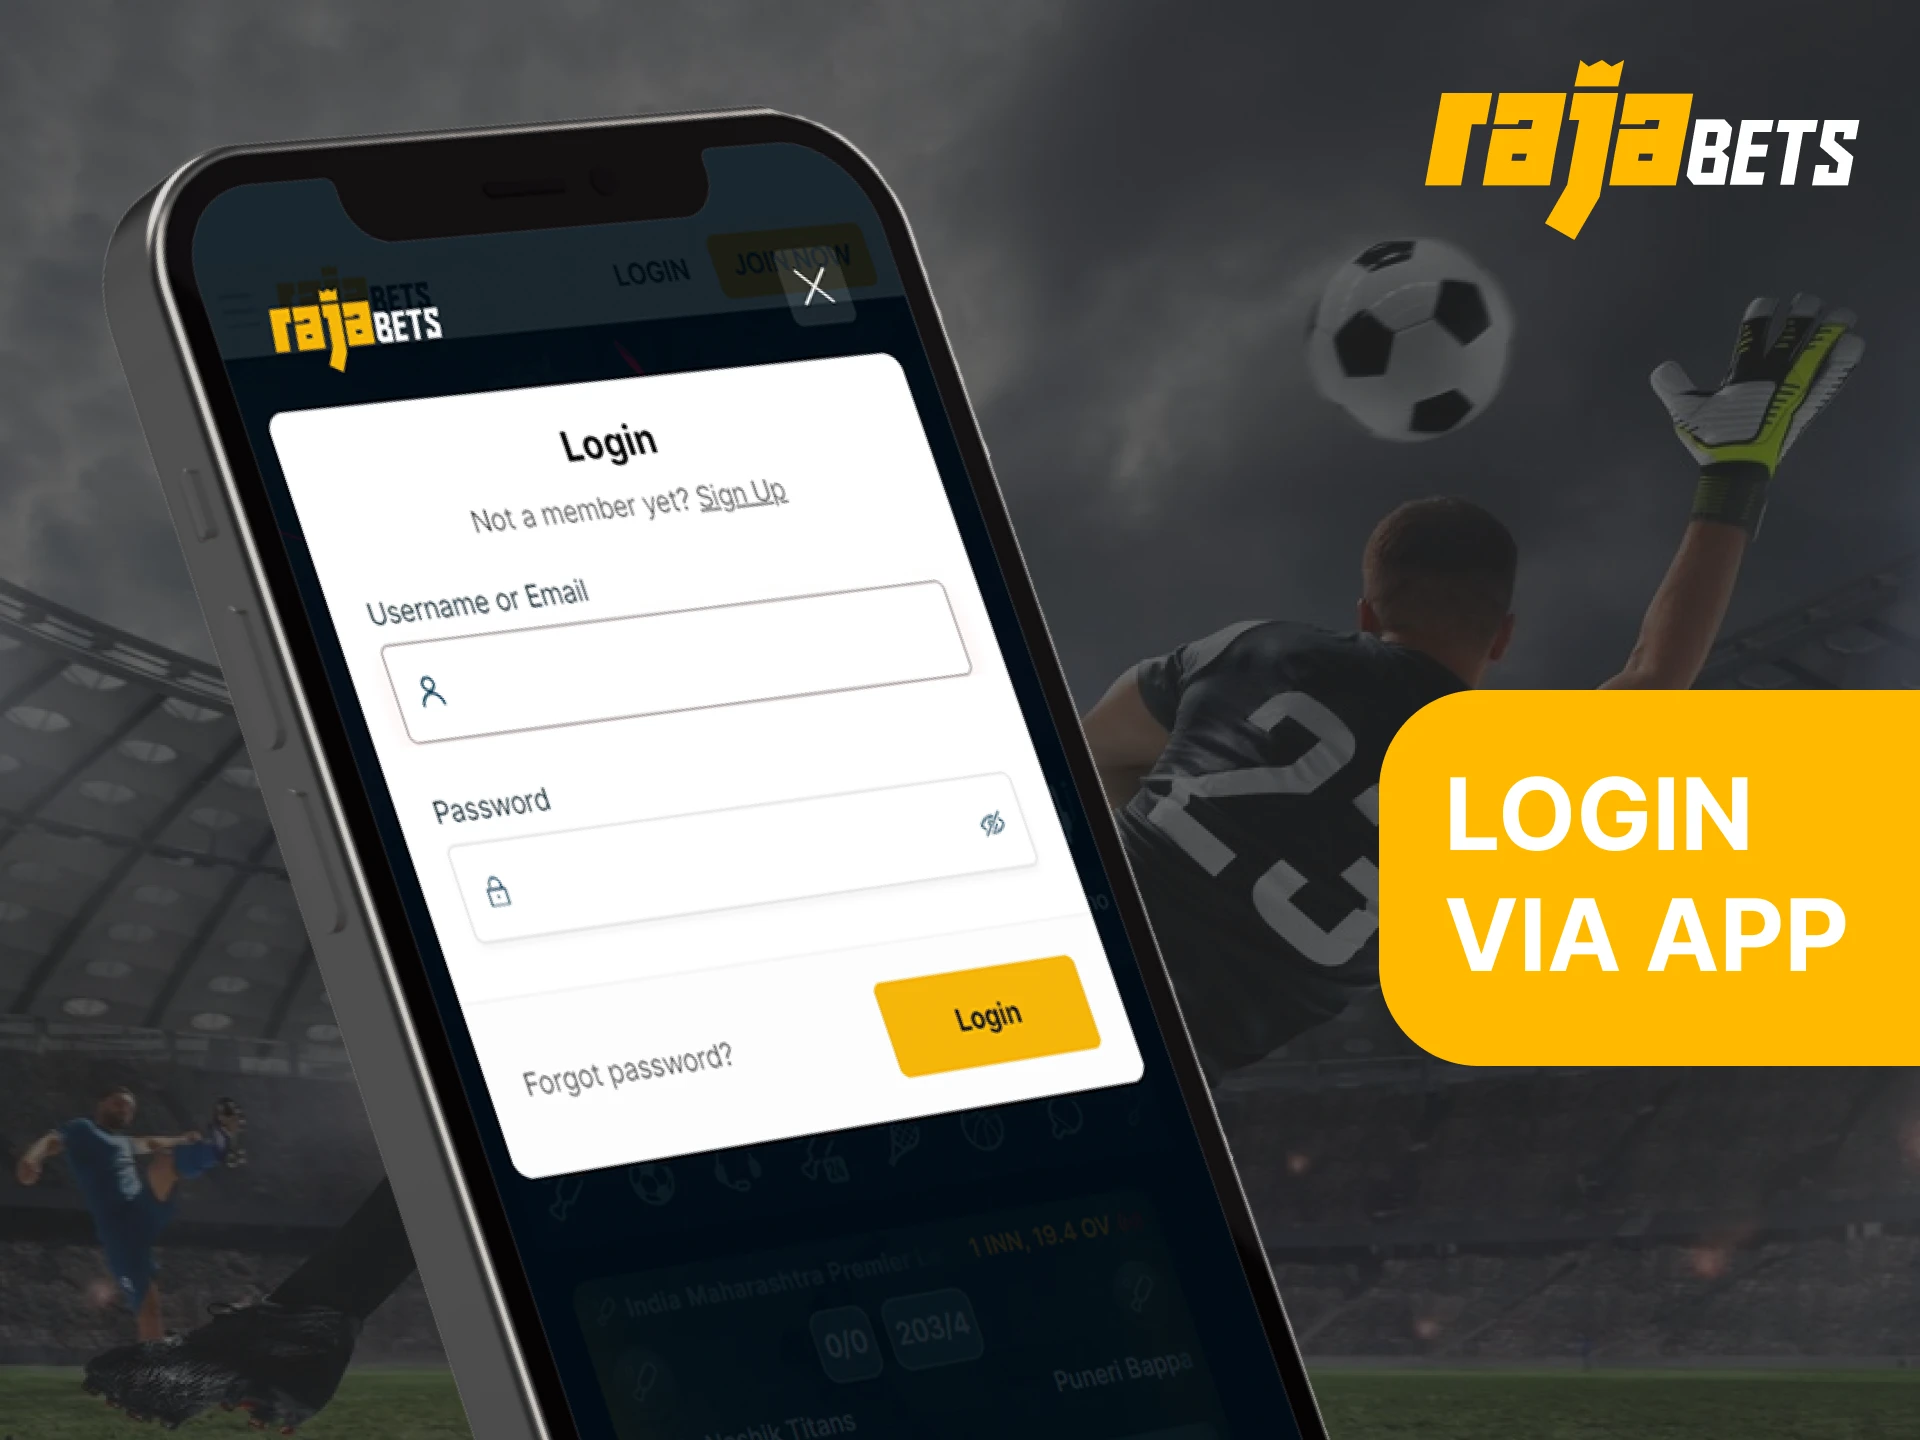 After downloading the Rajabets mobile app, log in to your personal account.